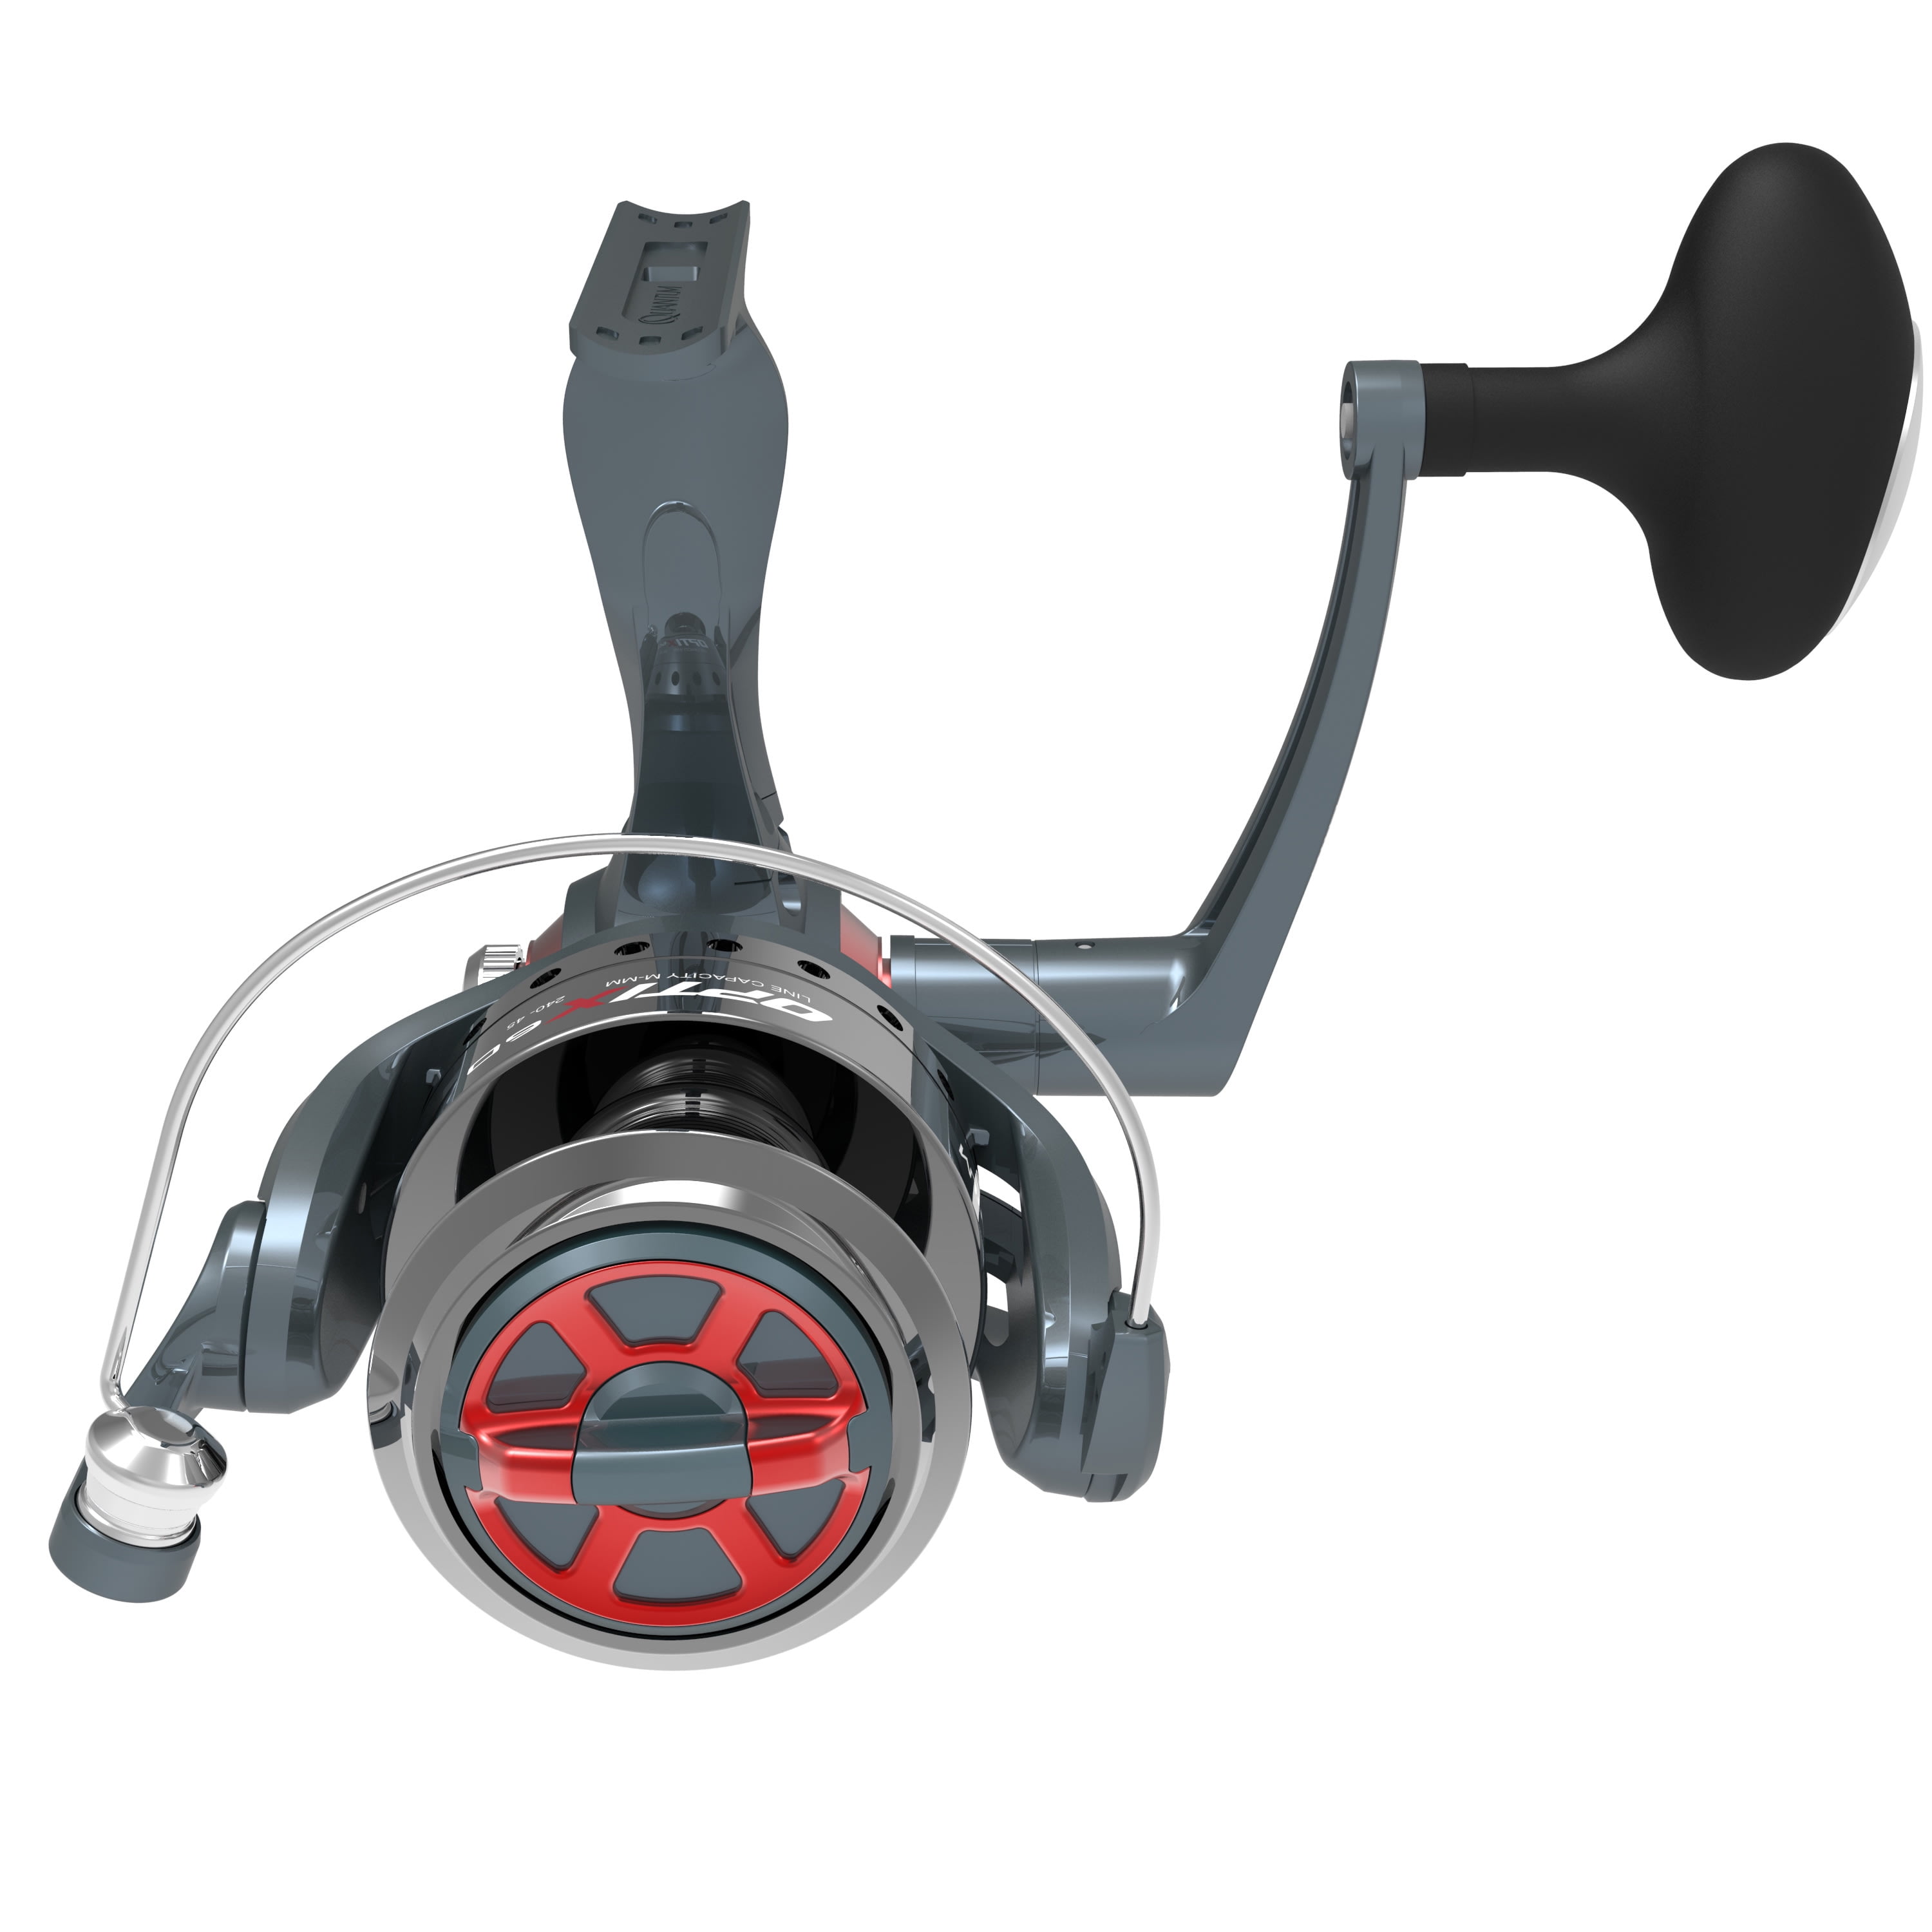 Quantum Optix Spinning Fishing Reel Size 80 4 Bearings Continuous Anti-Reverse with Smooth Precisely-Aligned Gears 